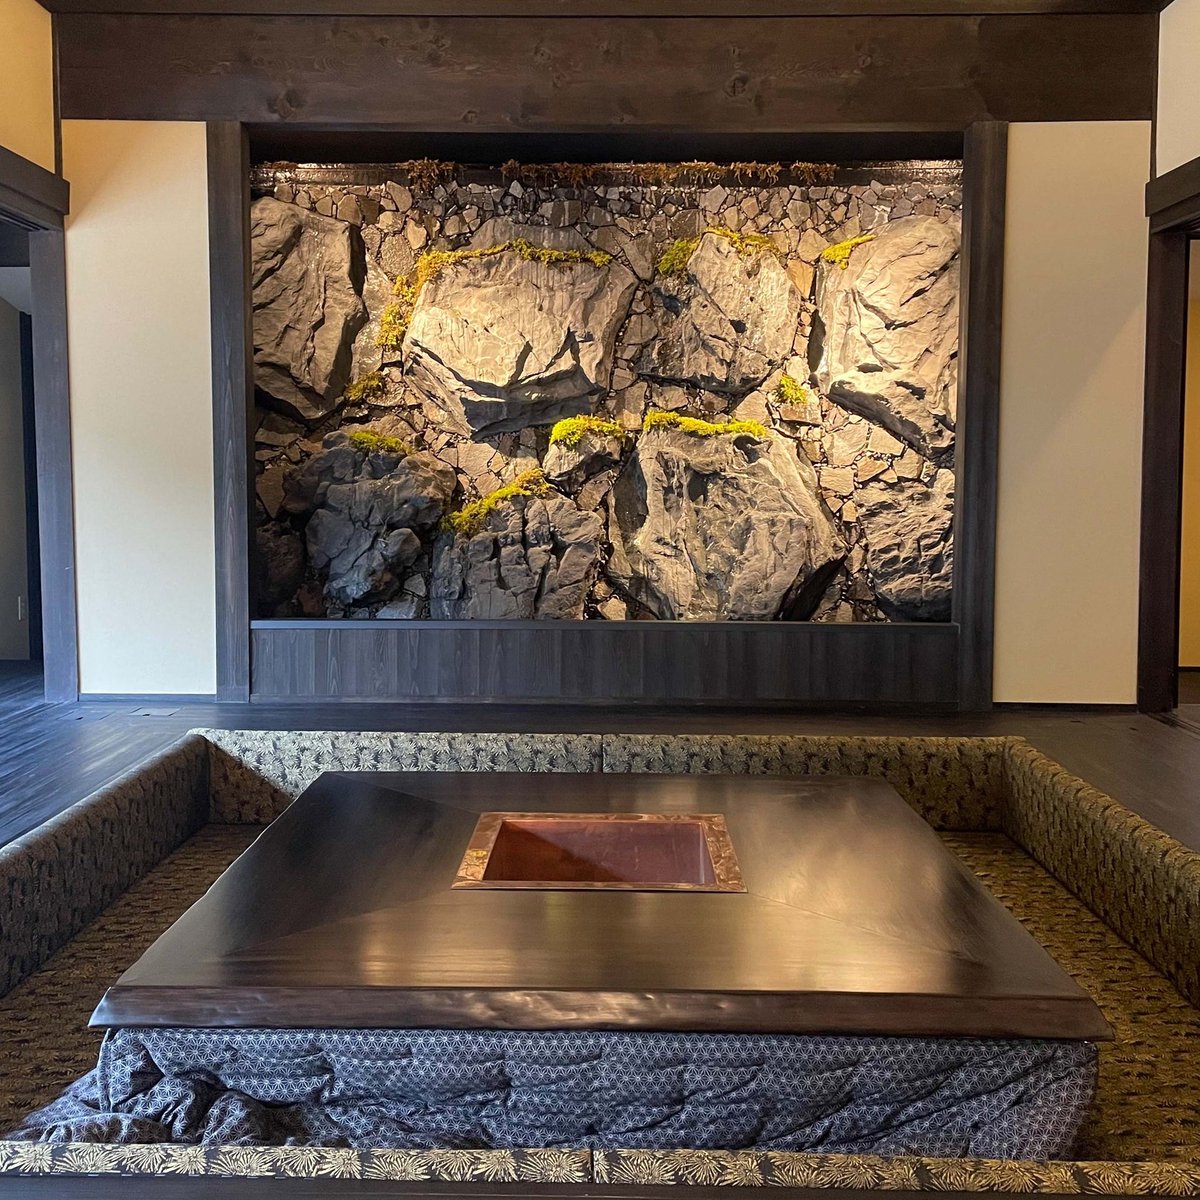 NEOLD Private House has a irori, or traditional Japanese hearth, facing the waterfall. Book your stay at this exceptional location here: neold.co.jp/accommodation

#neold #neoldprivatehouse #luxuryhospitality #travelindustry #Sakura2024 #cherrytree #cherryblossomjapan #cherrytrees